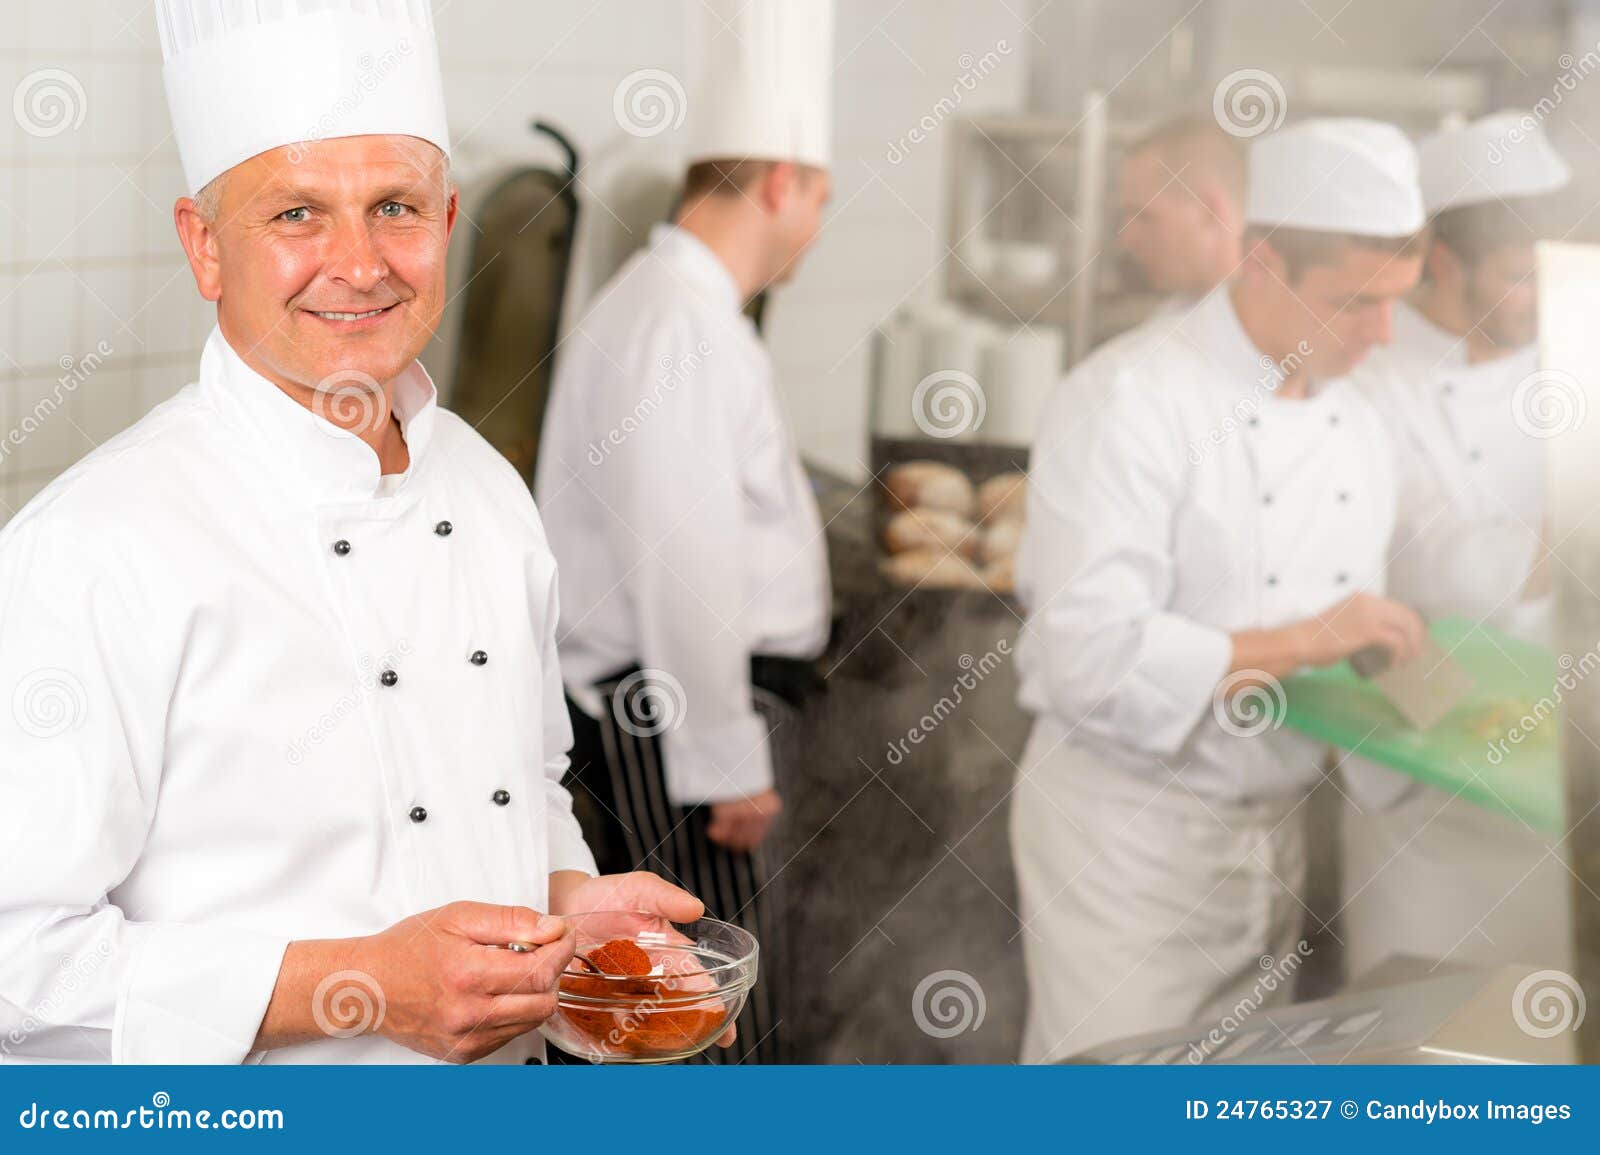 professional kitchen smiling chef add spice food